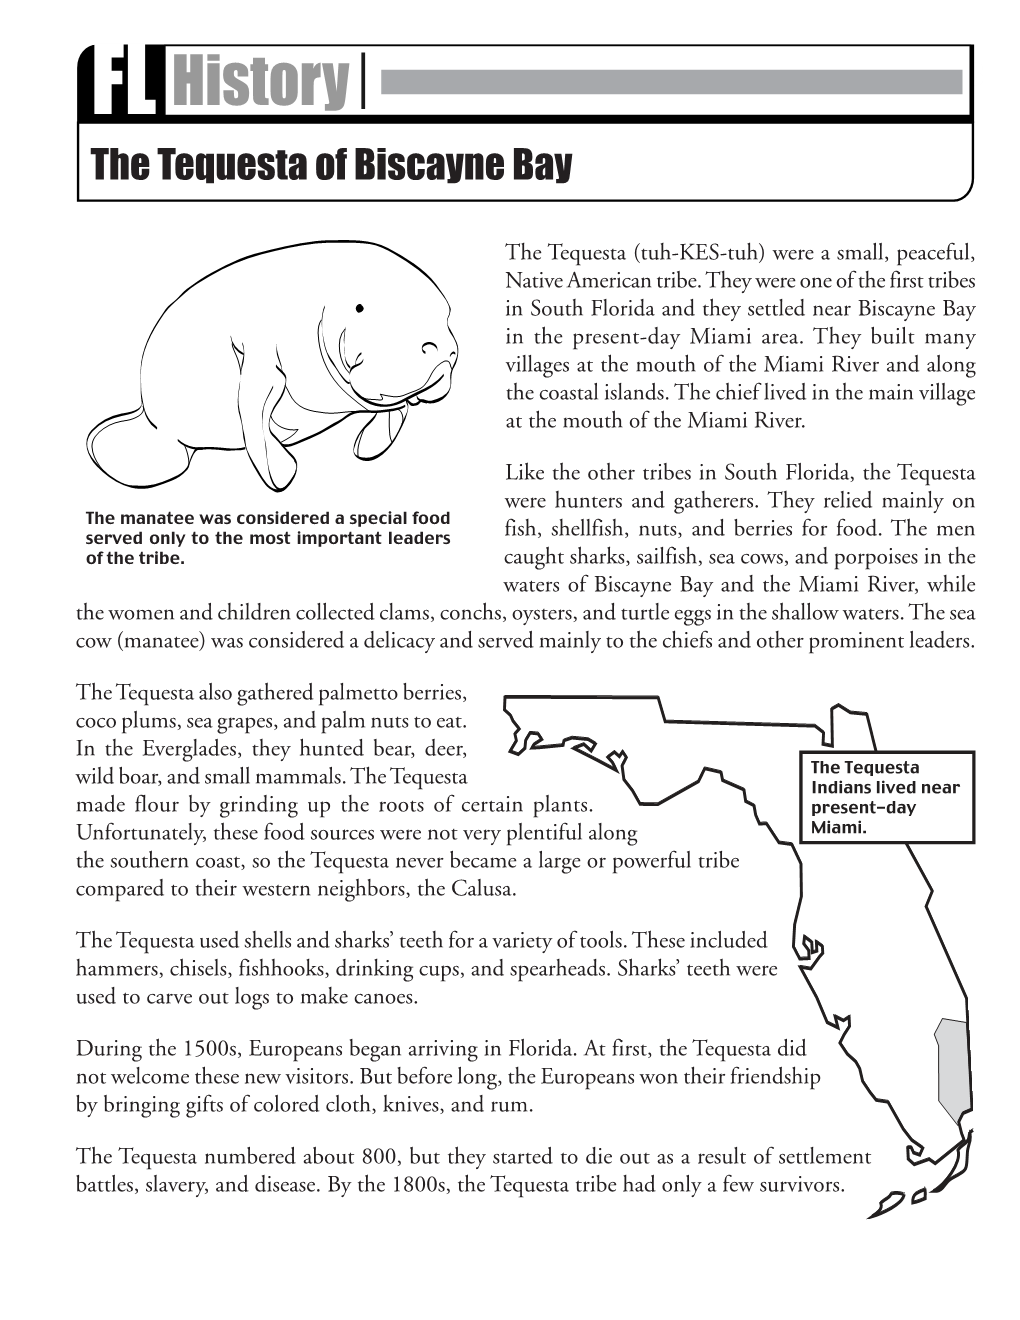 The Tequesta of Biscayne Bay